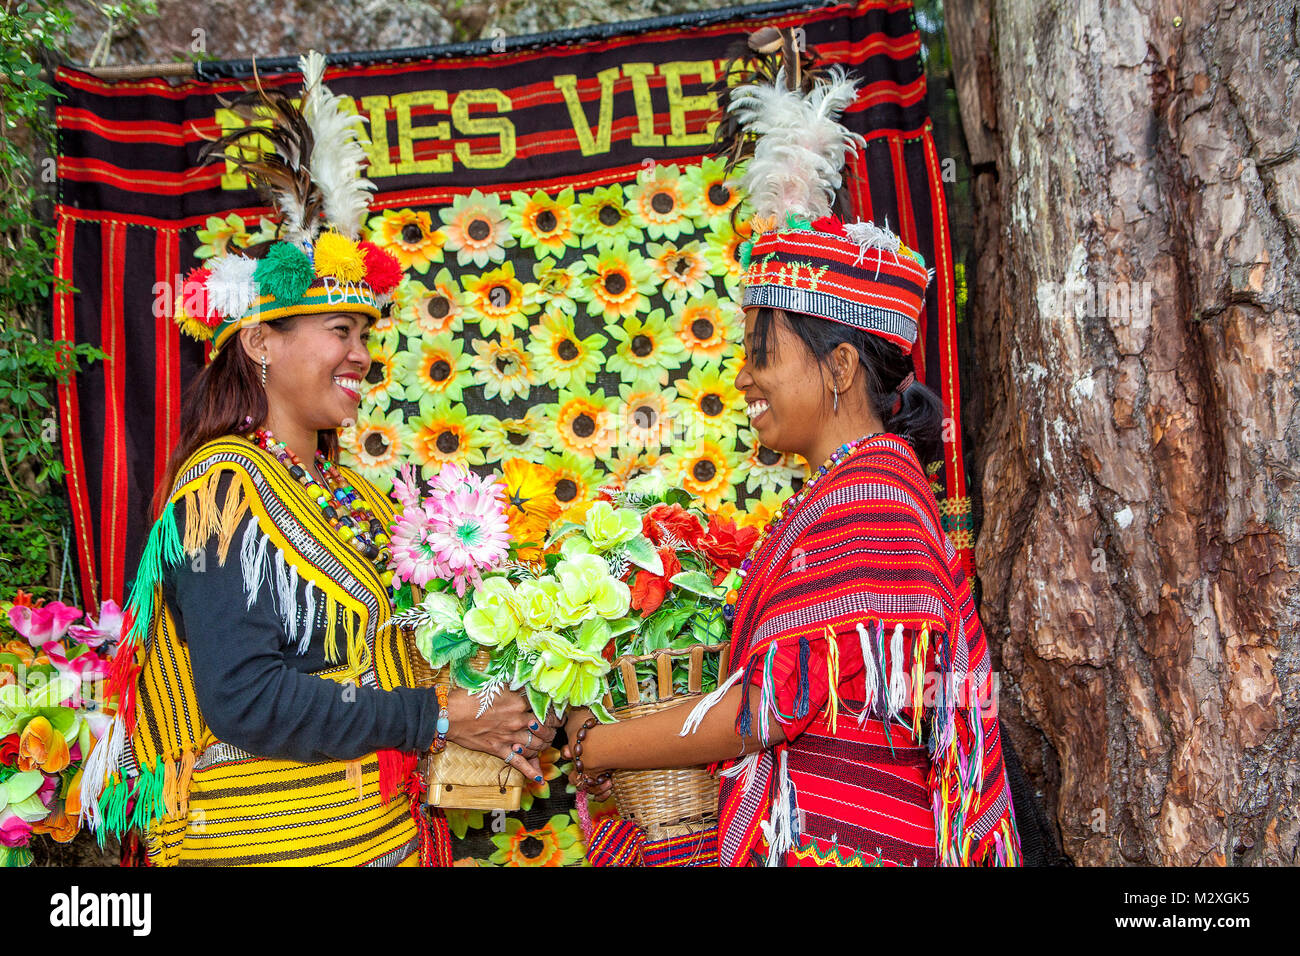 Two Filipino women tourists dress in traditional Ifugao indigenous peoples' costumes at Mines View Park in Baguio City, Luzon, Philippines. Stock Photo